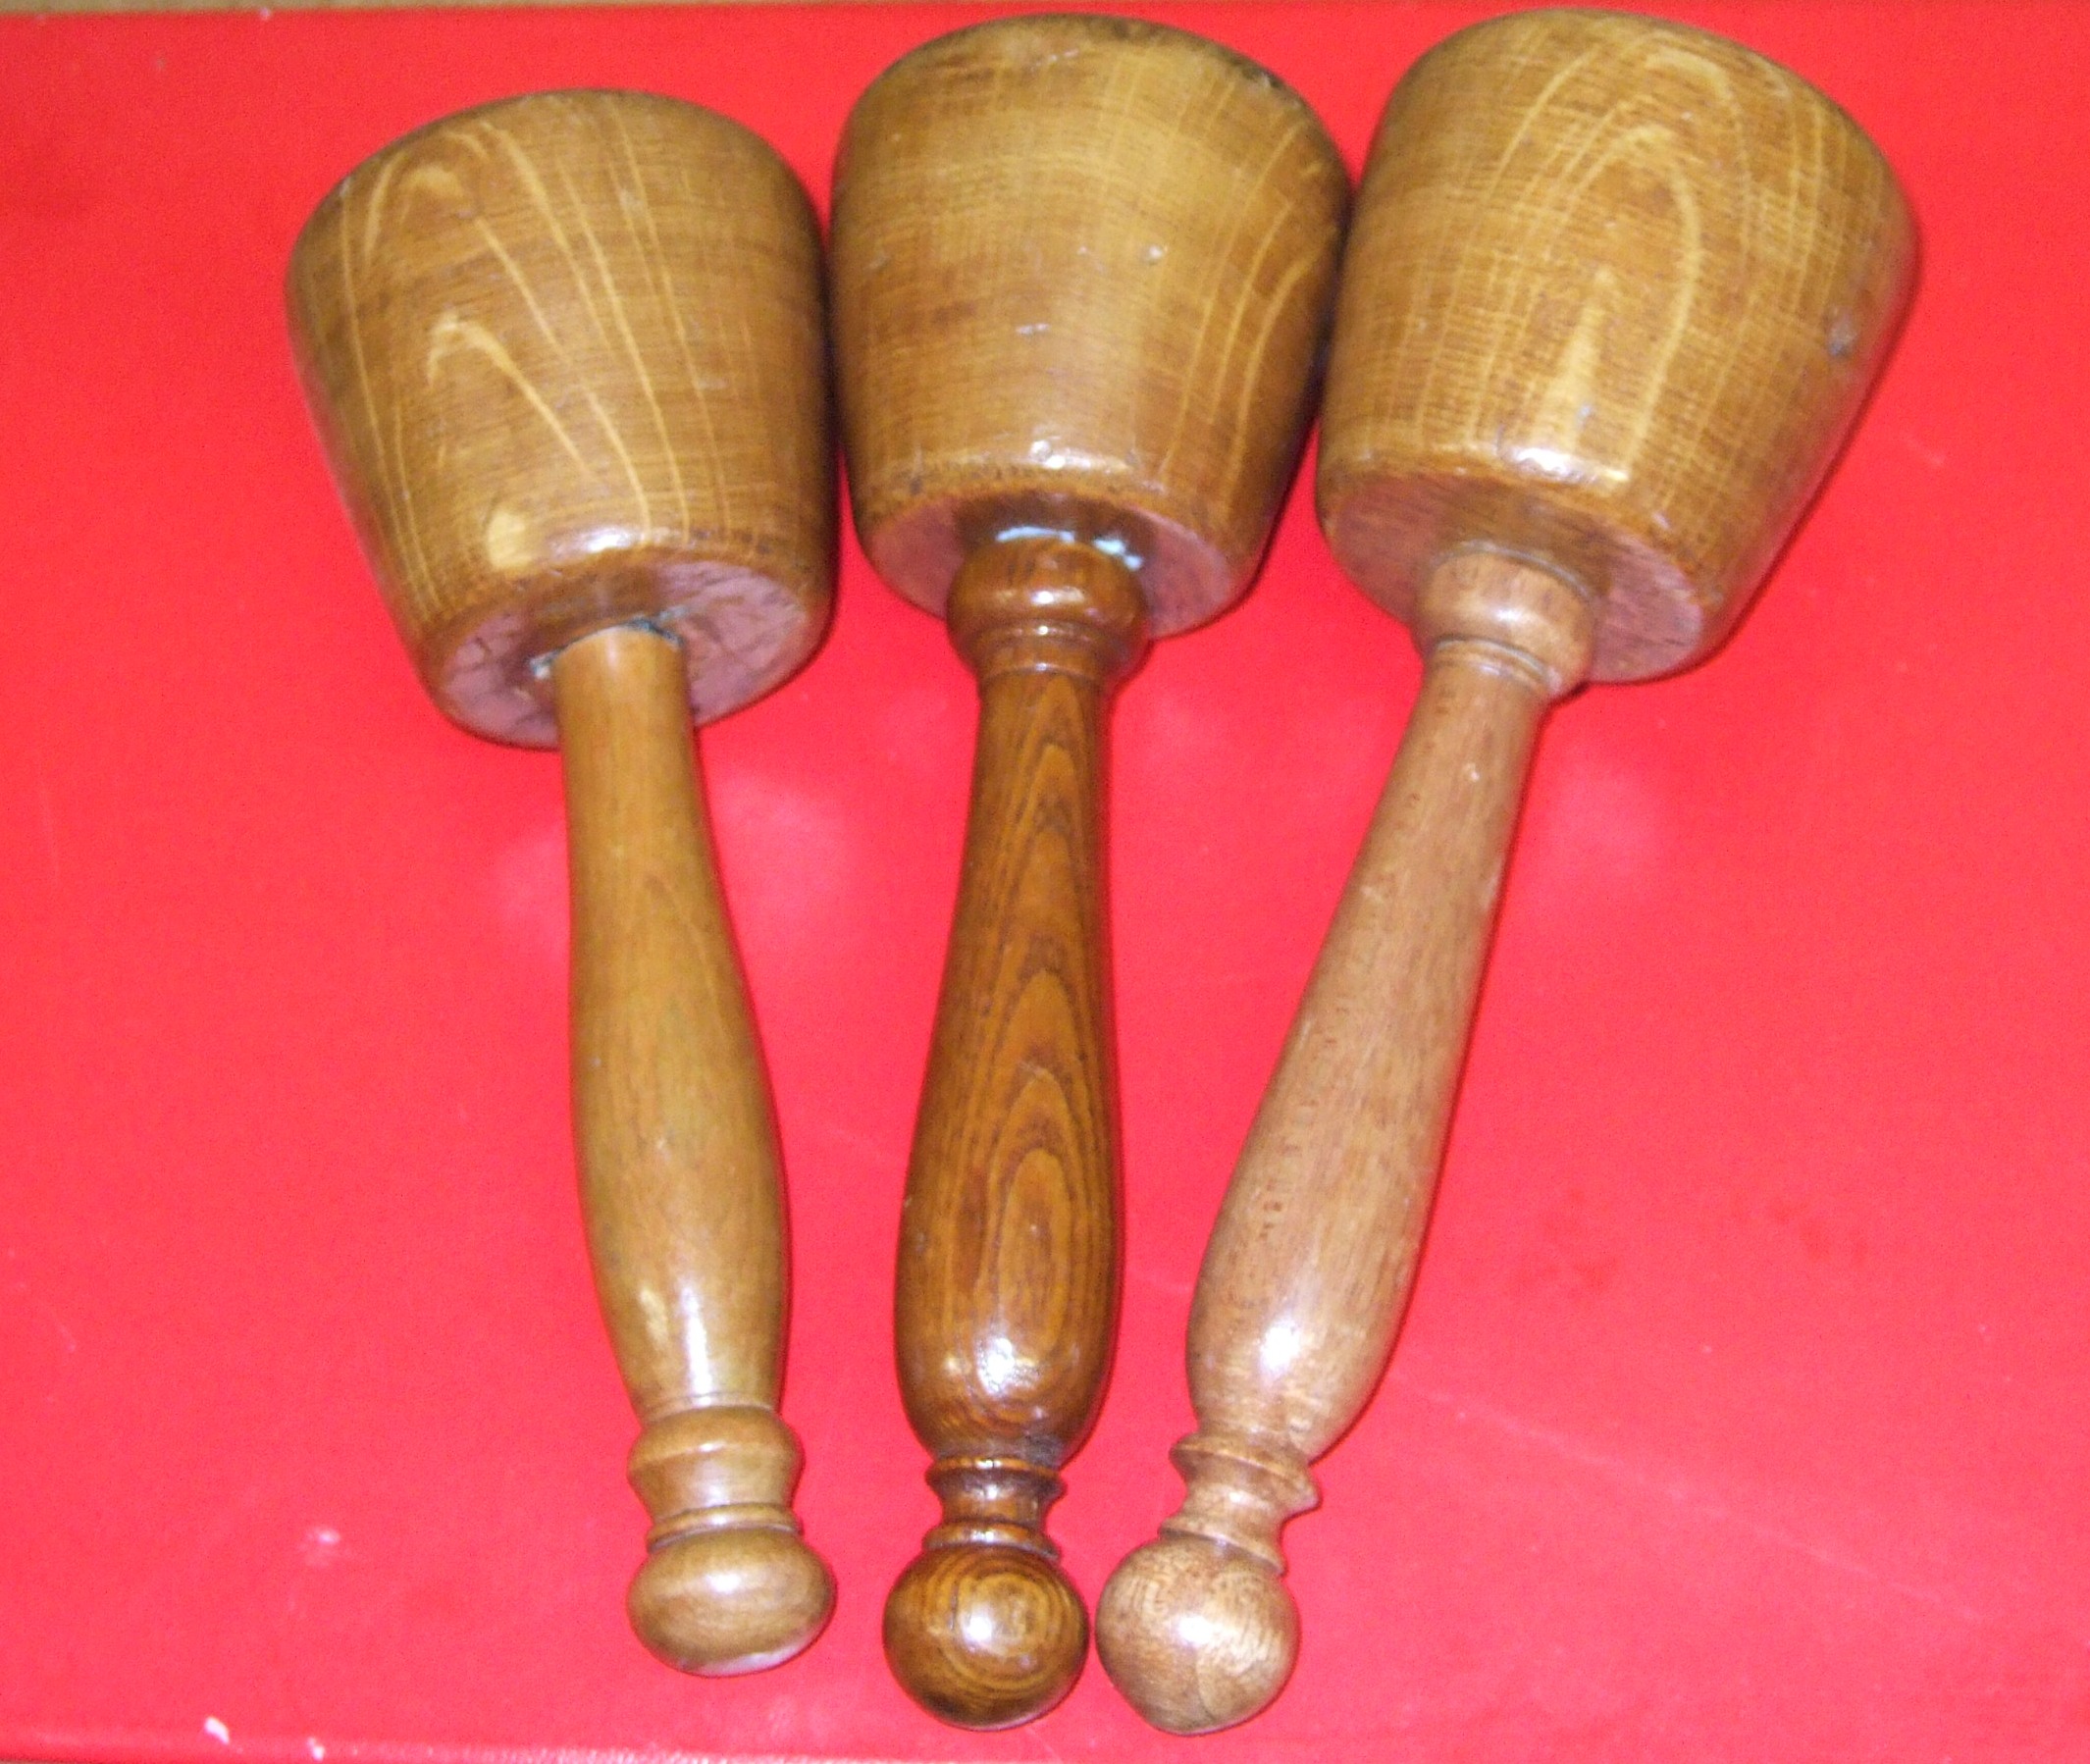 The wooden gavels